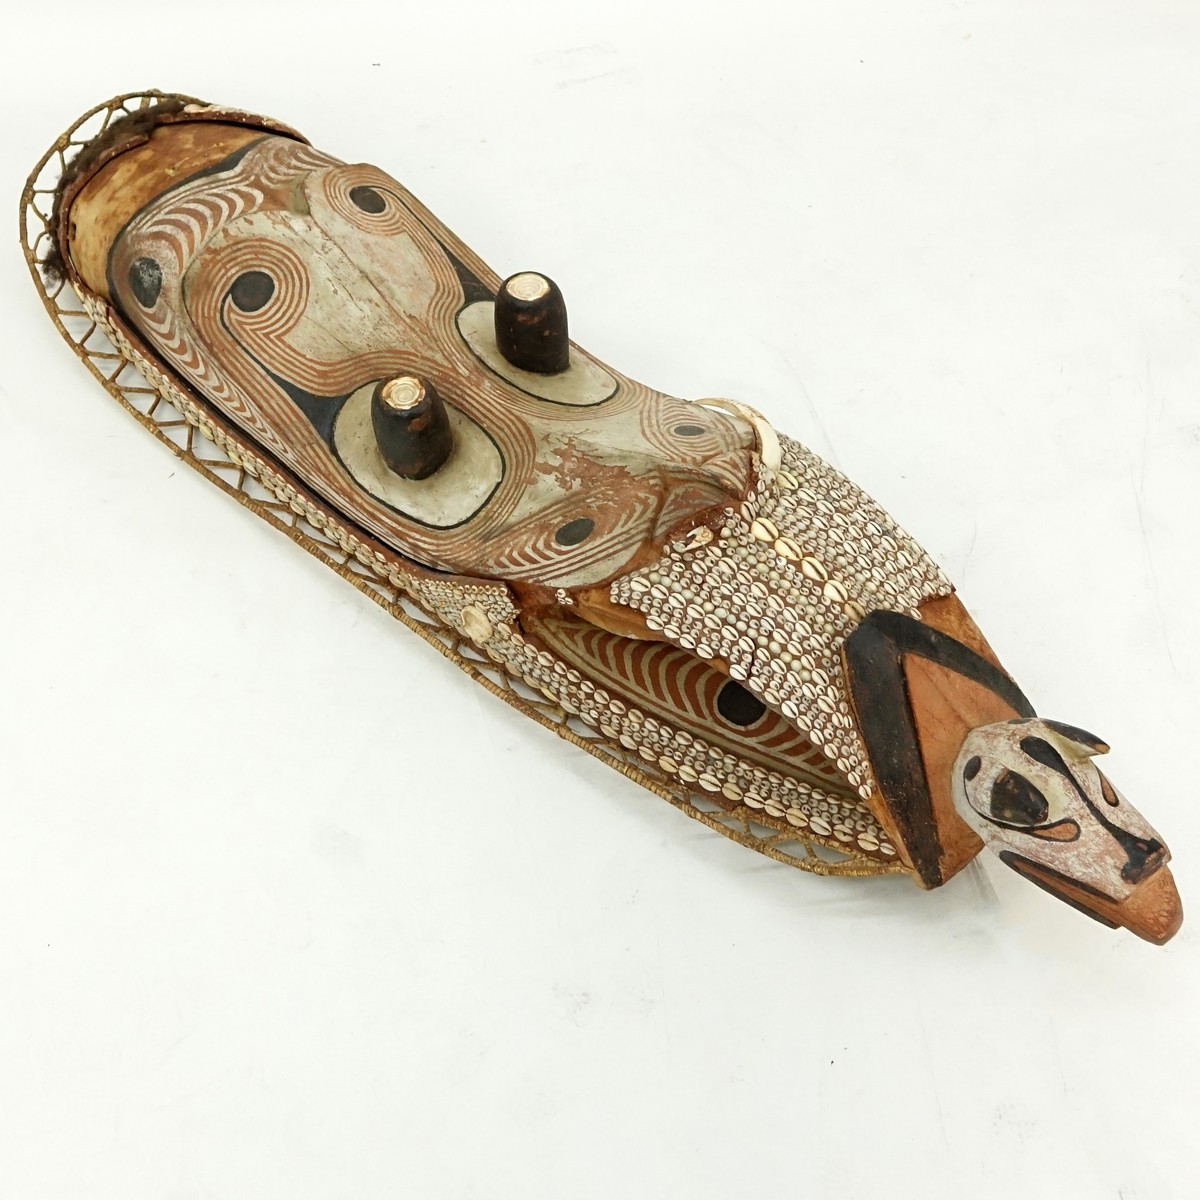 Large Wood Carved Polychrome Tribal Mask with Shell and Plaited Fibers. Possibly from the Sepik River, Papua New Guinea area.